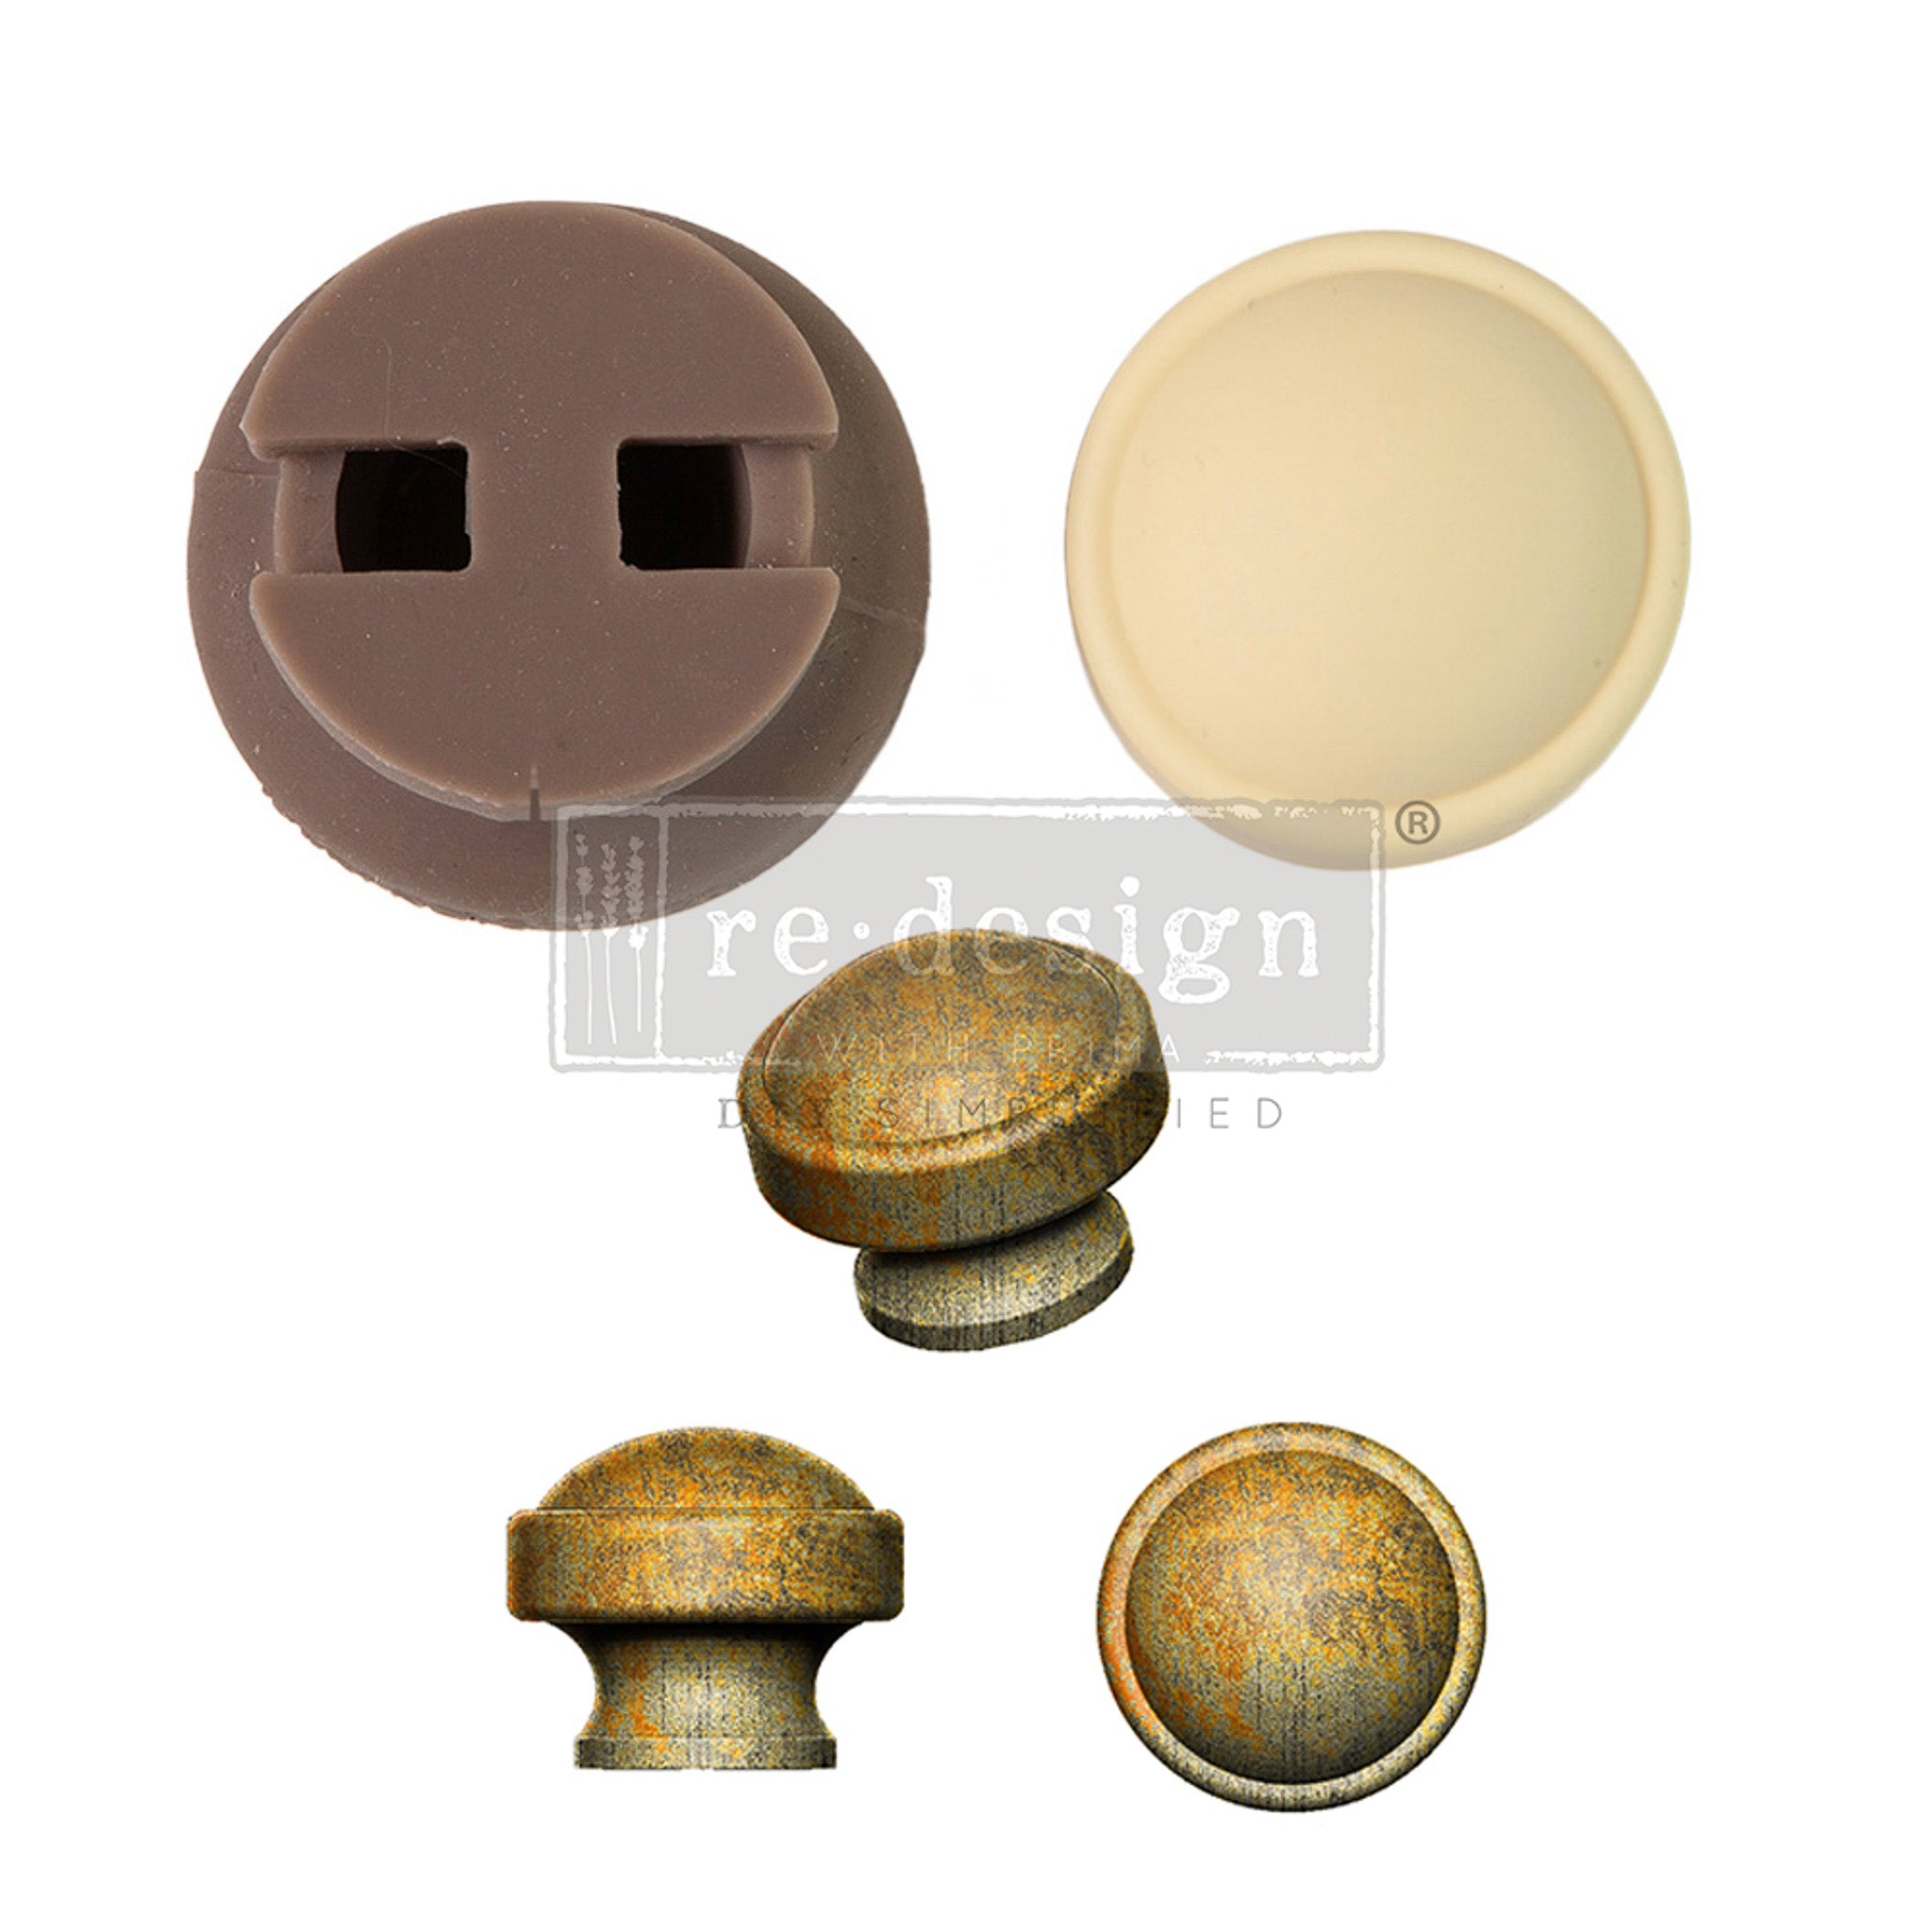 A brown silicone mold, cream-colored resin casting, and 3 views of gold-colored castings of a round drawer knob are against a white background.